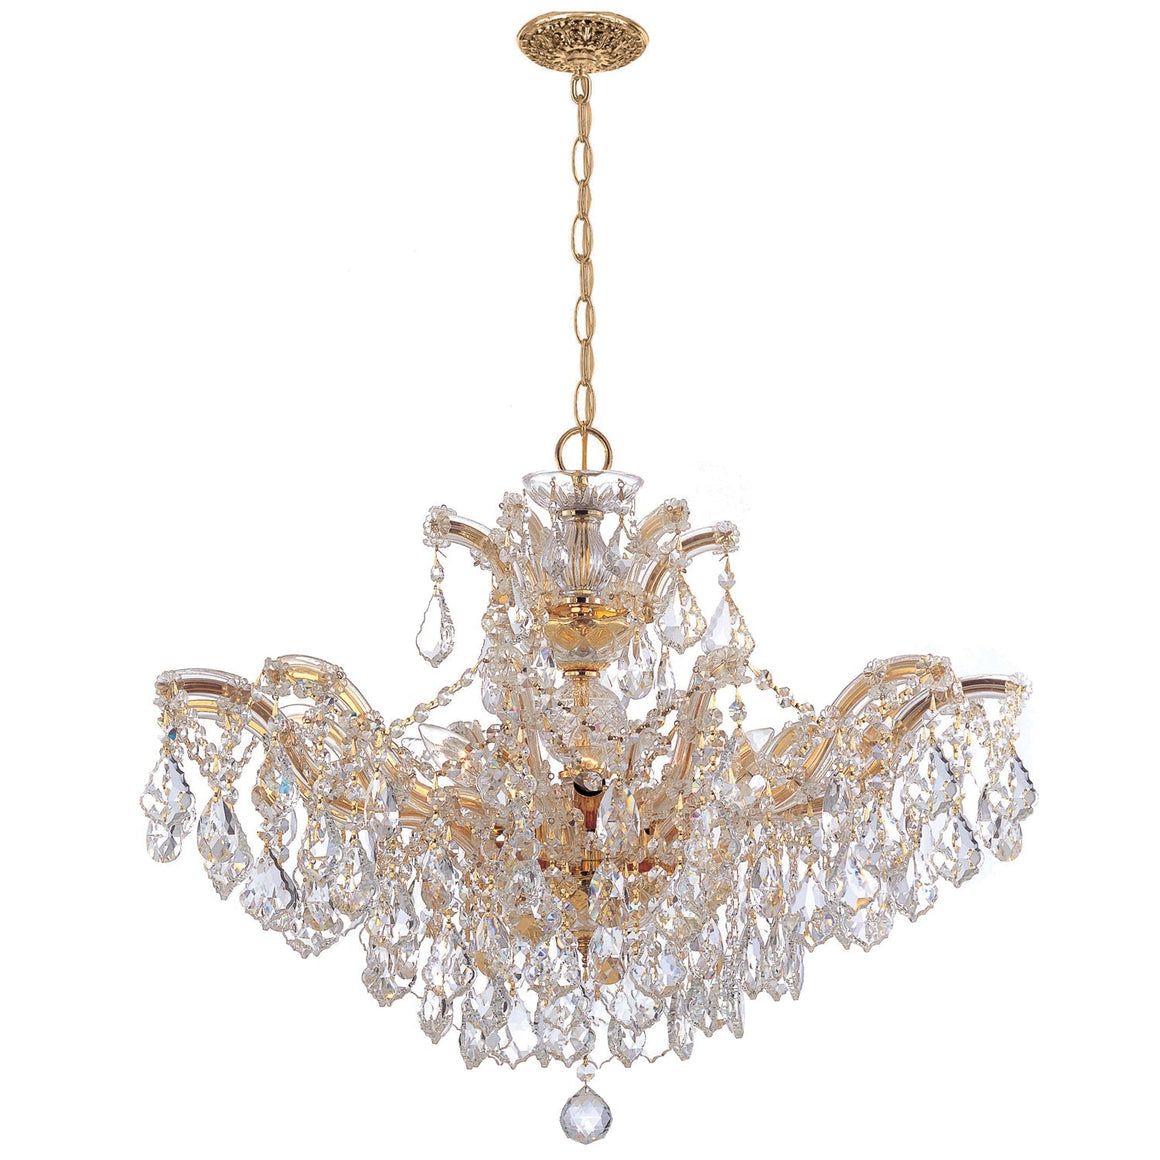 Maria Theresa 6 Light Spectra Crystal Gold Chandelier